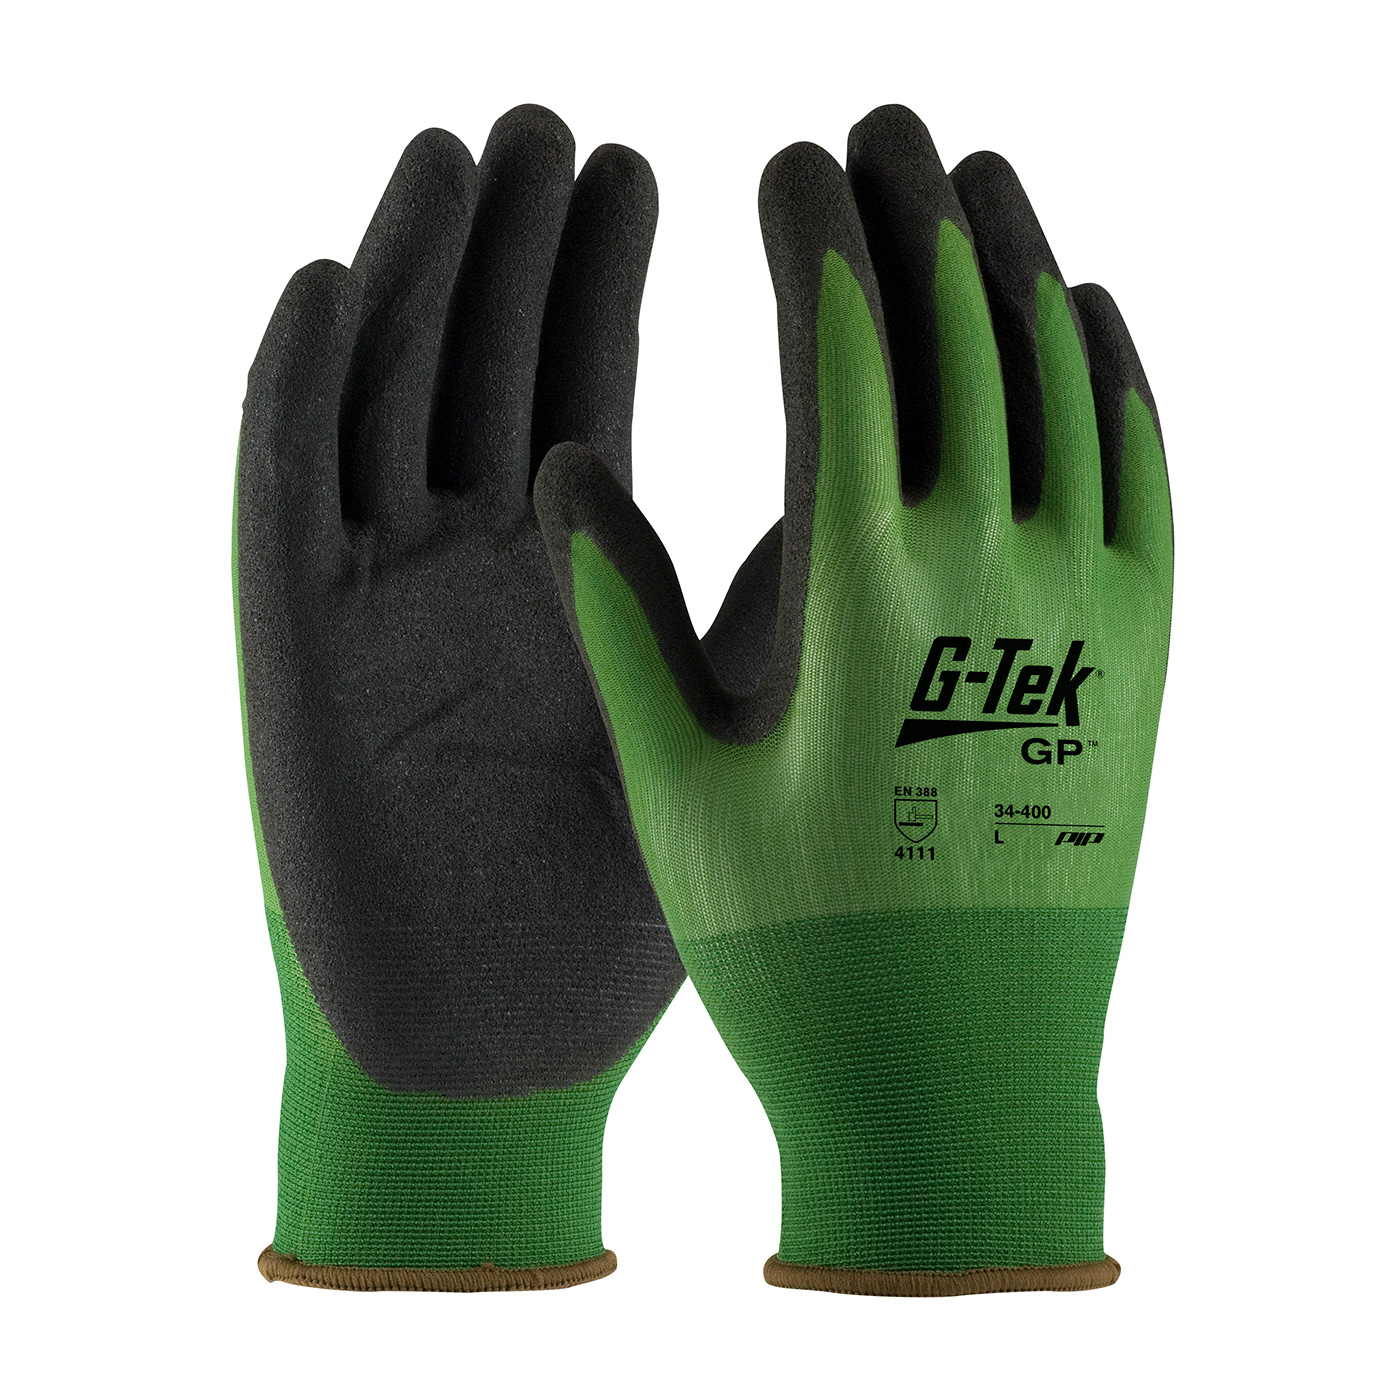 #34-400 PIP® G-Tek® GP Seamless Knit Polyester Glove with Nitrile Coated MicroSurface Grip on Palm & Fingers - 18 Gauge